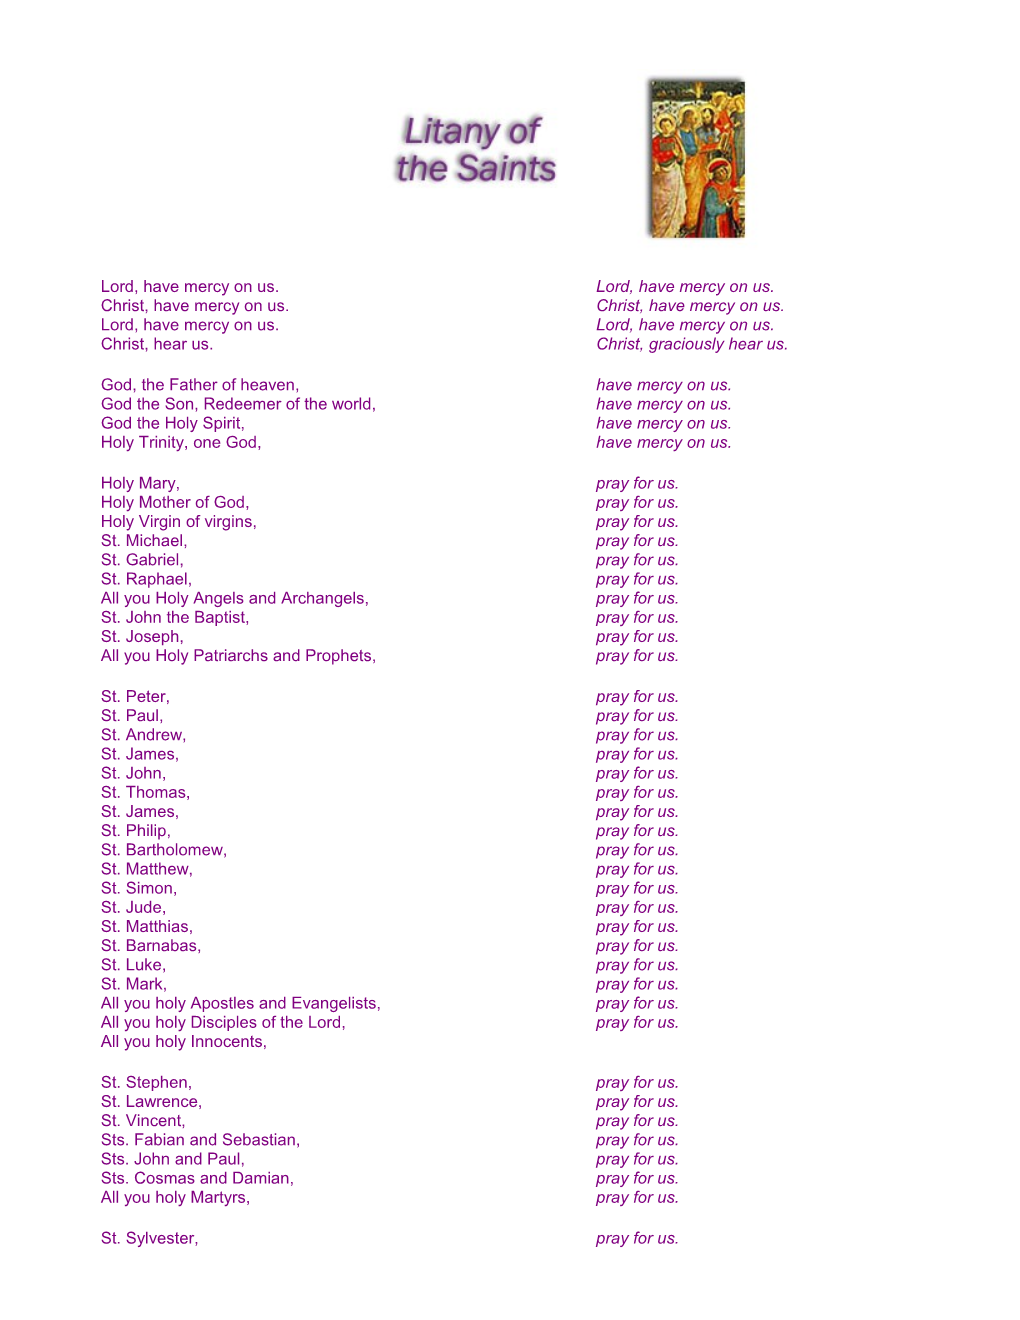 Please Don T Feel You Must Include All of These Saints. Pick the Ones You Like to Give